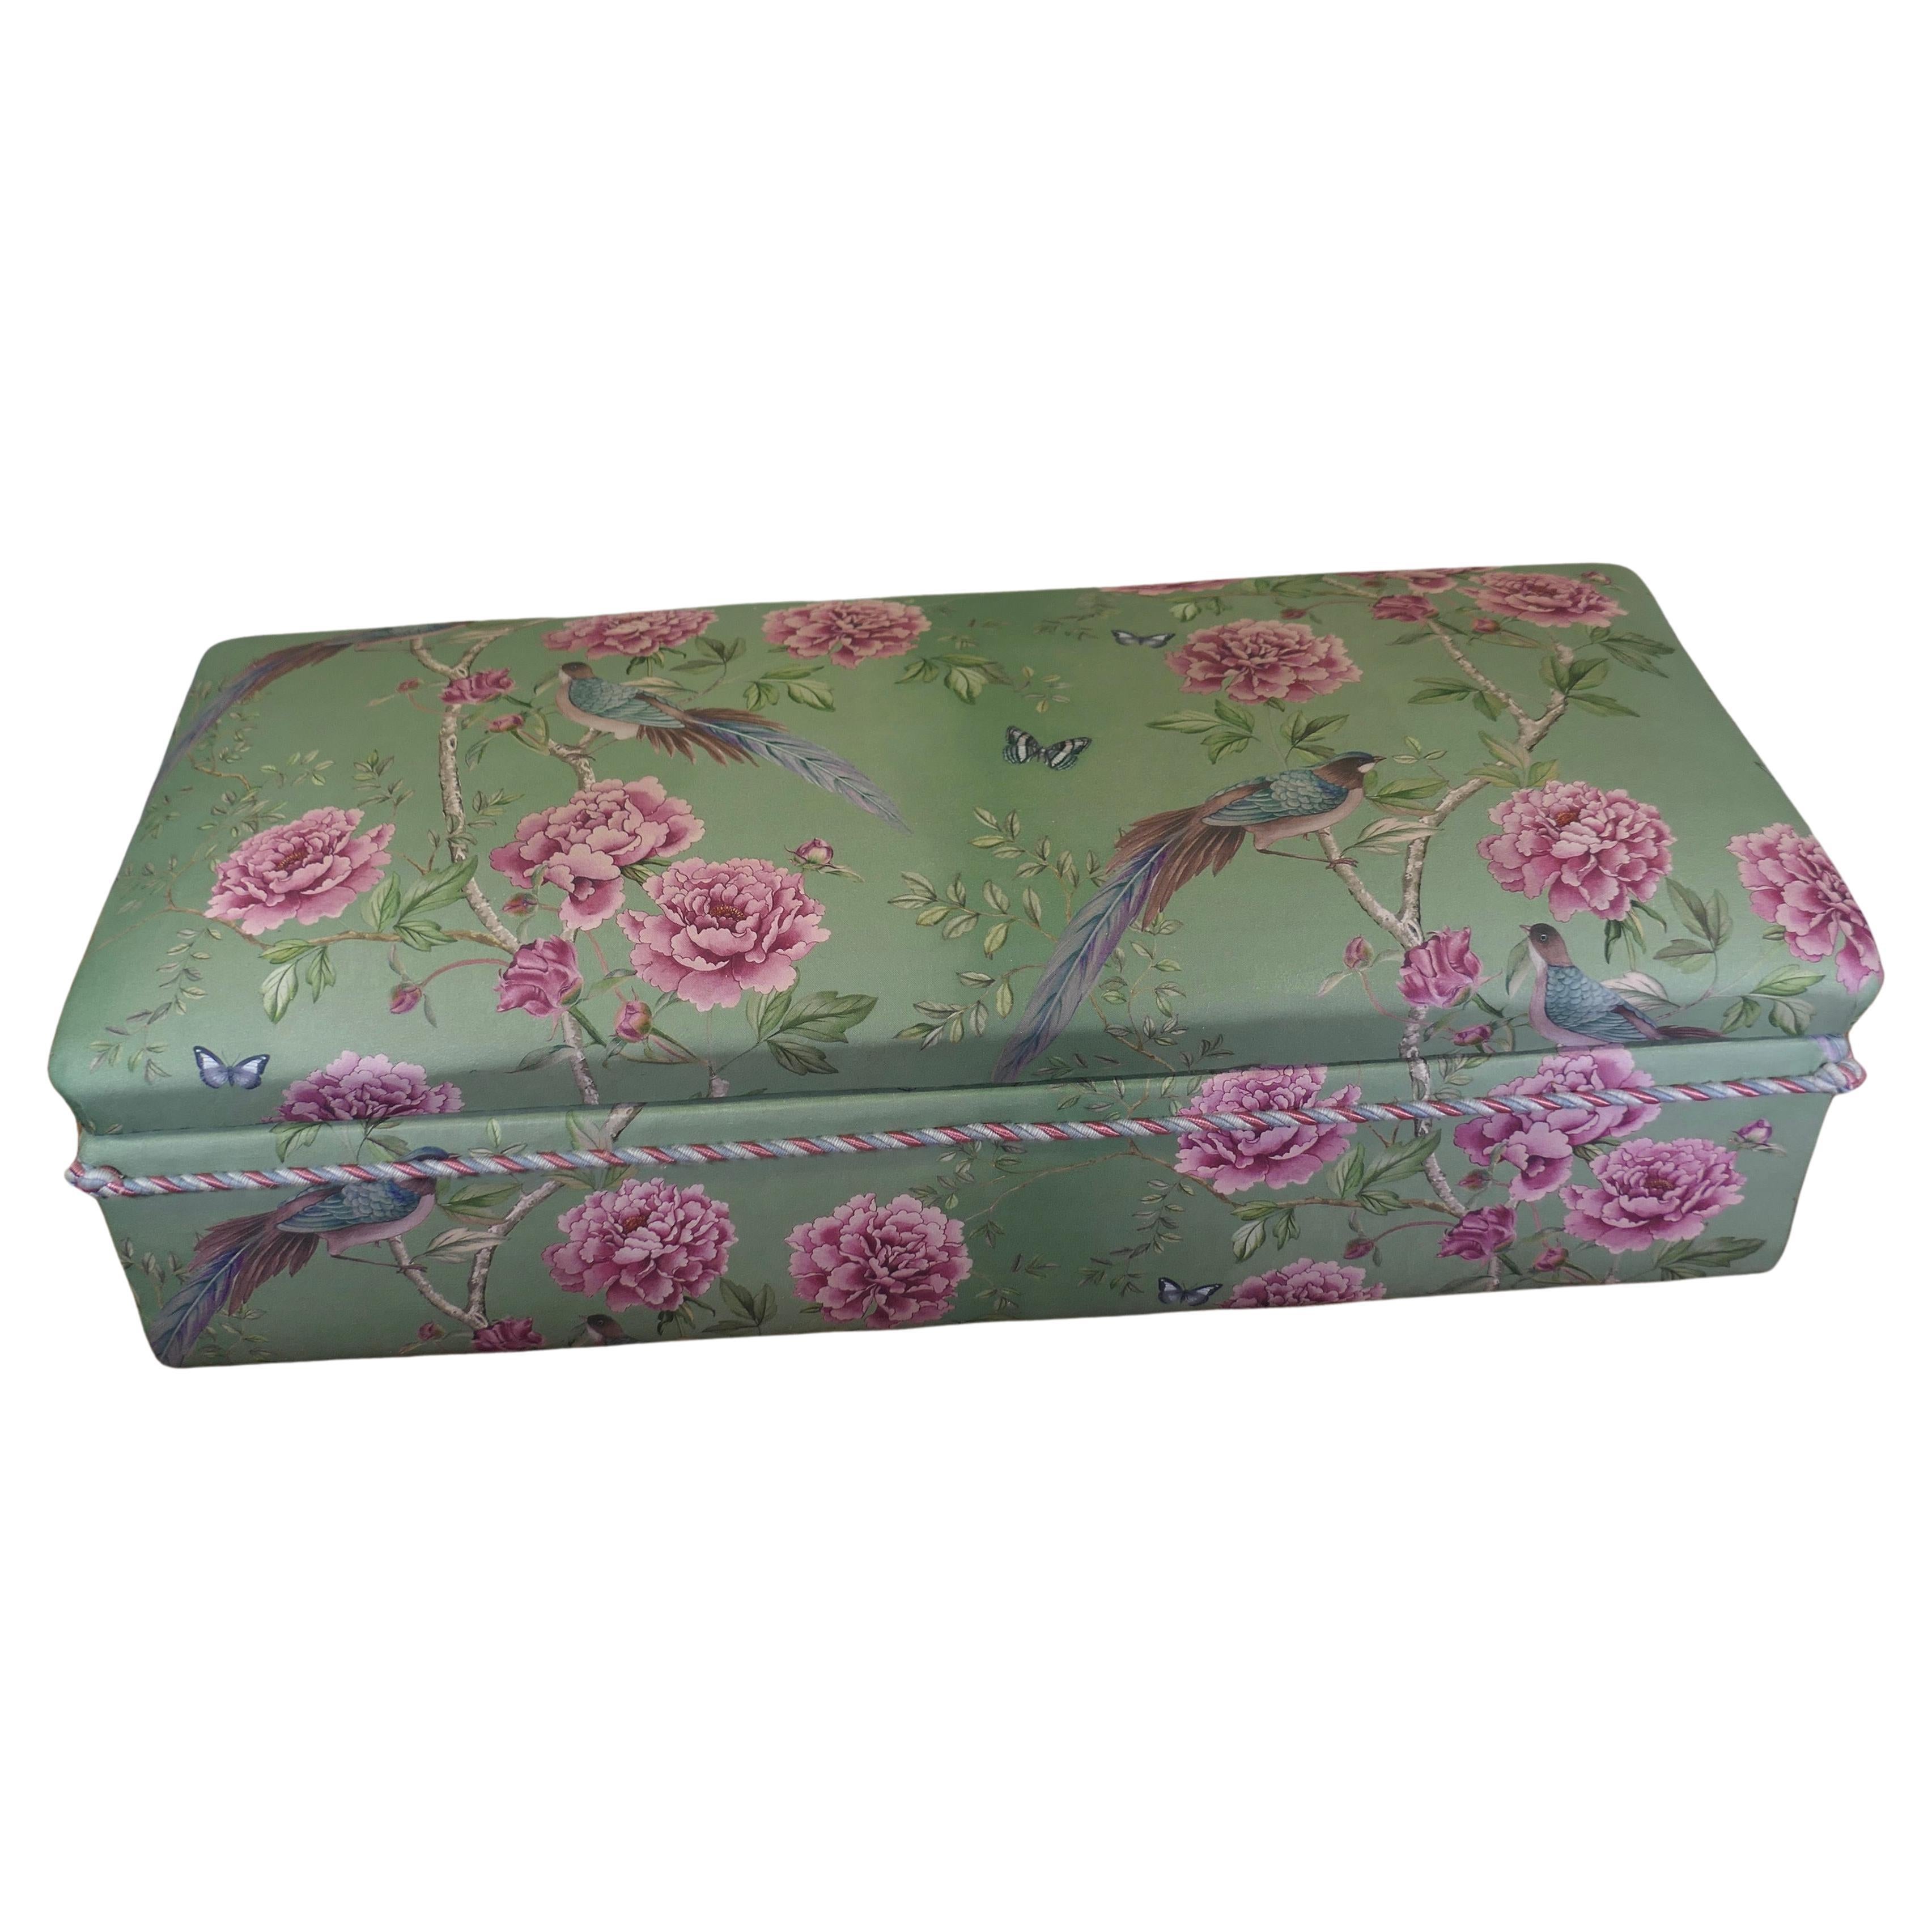 A Large Upholstered Ottoman or Window Seat   This piece is upholstered with a be